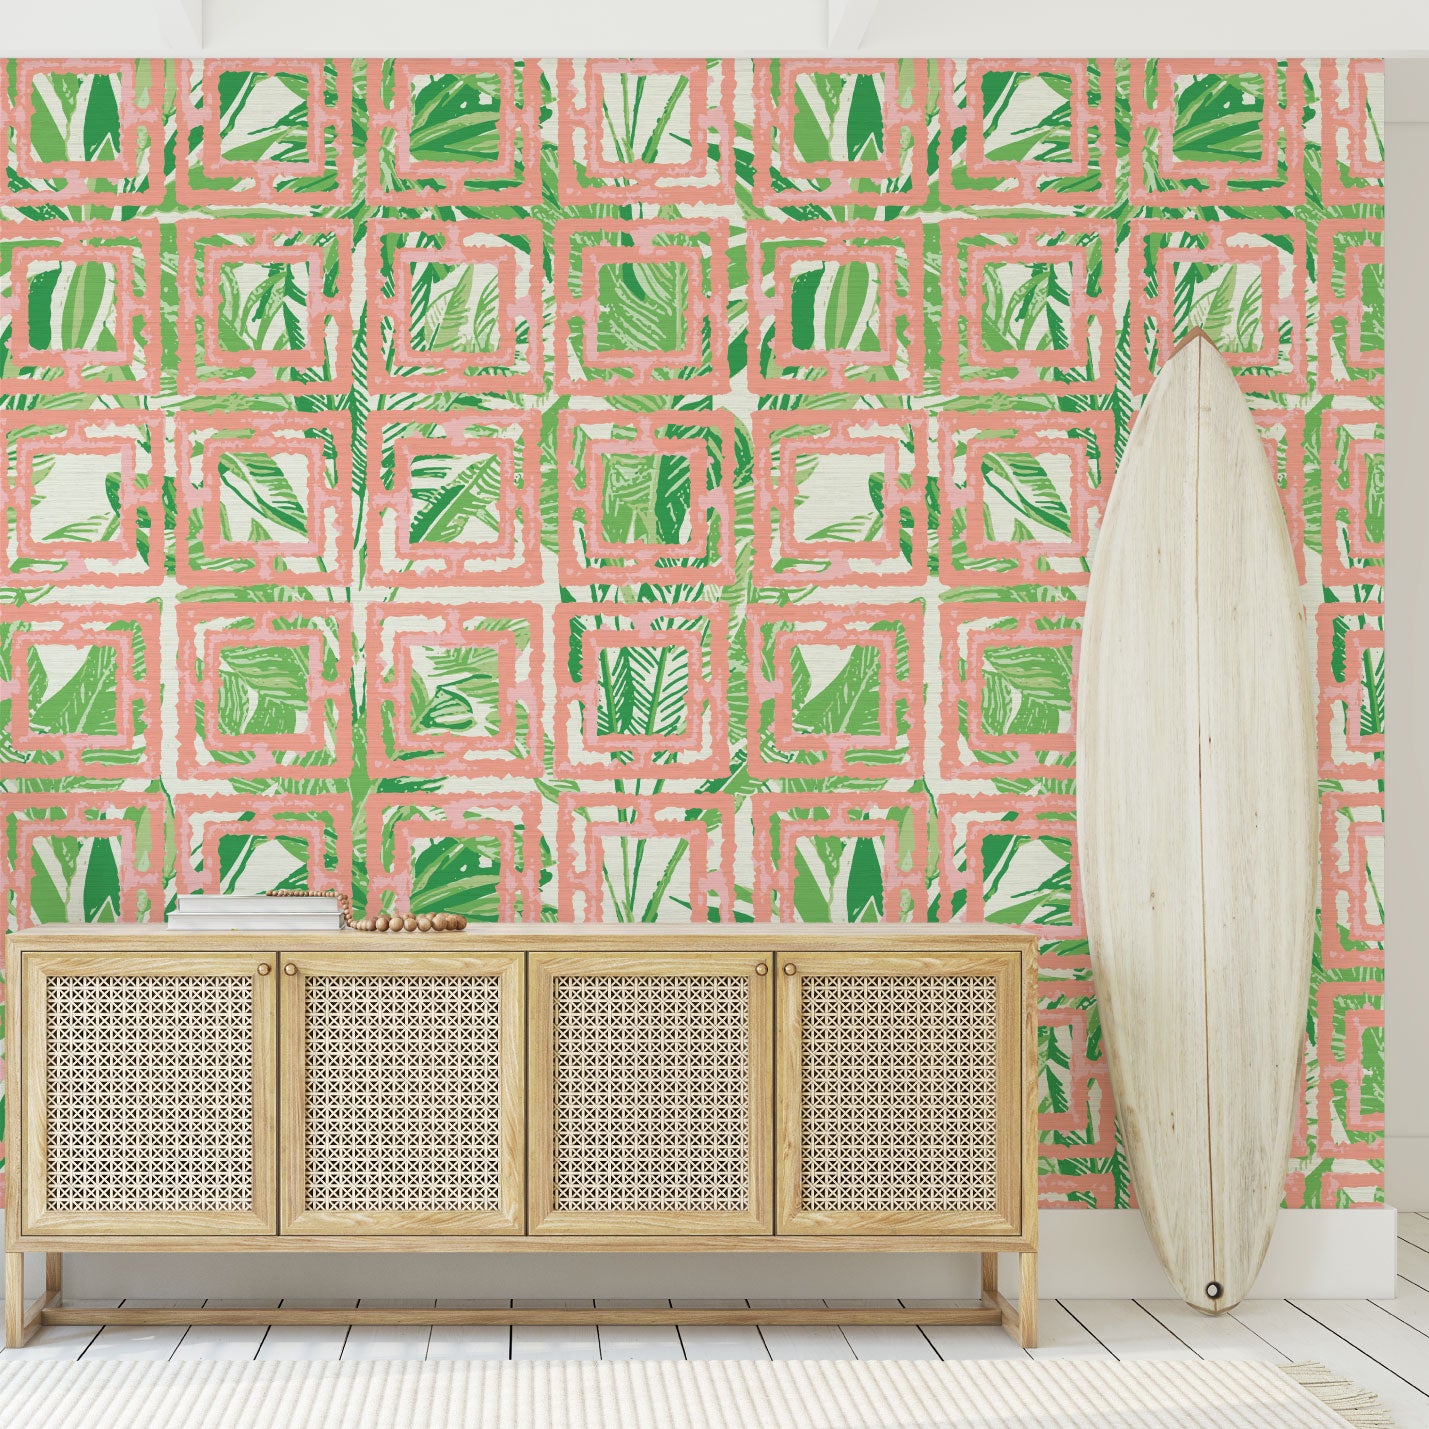 Grasscloth wallpaper Natural Textured Eco-Friendly Non-toxic High-quality  Sustainable Interior Design Bold Custom Tailor-made Retro chic Grand millennial Maximalism  Traditional Dopamine decor Tropical Jungle Coastal Garden Seaside Seashore Waterfront Retreat Relaxed beach vibes Beach cottage Shoreline Oceanfront Nautical Cabana preppy palm leaves breeze blocks pink palm beach palm springs stripes geometric green bright